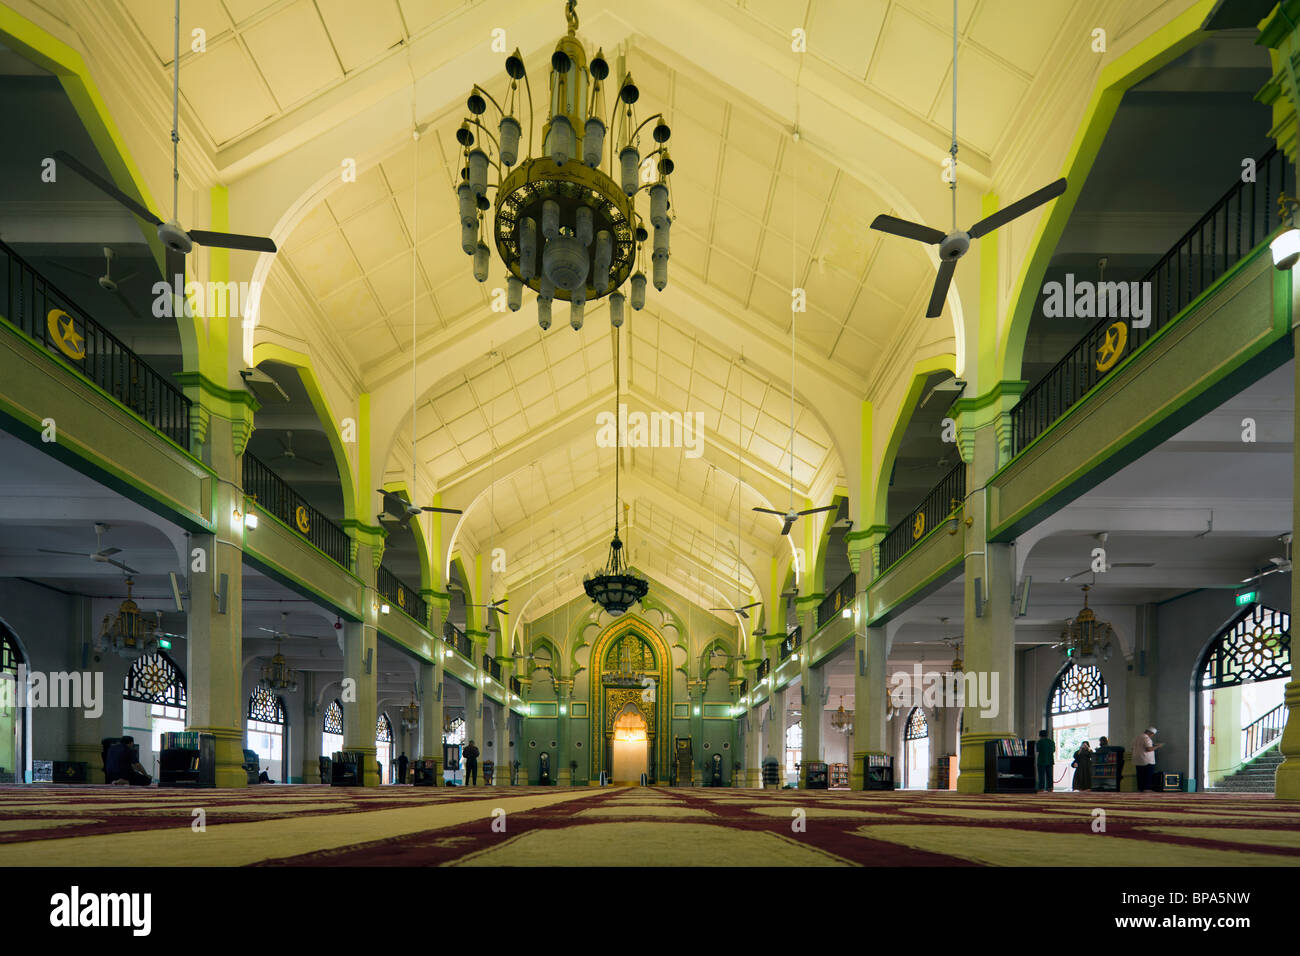 Sultan Mosque, Singapore: view of interior of the prayer hall Stock Photo